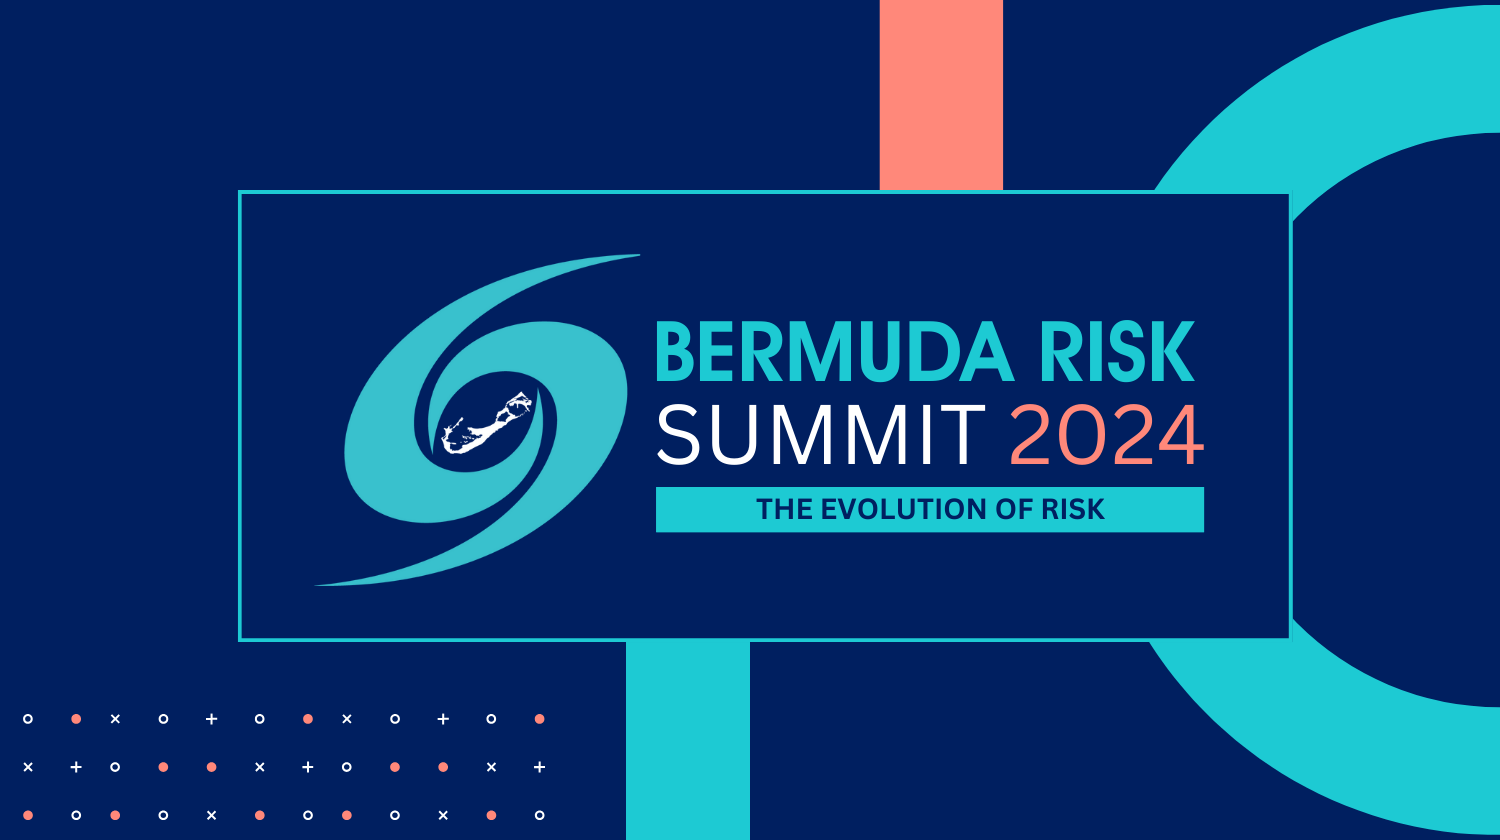 Keynote Conversation Between Premier and Arch Capital CEO to Kick Off Bermuda Risk Summit